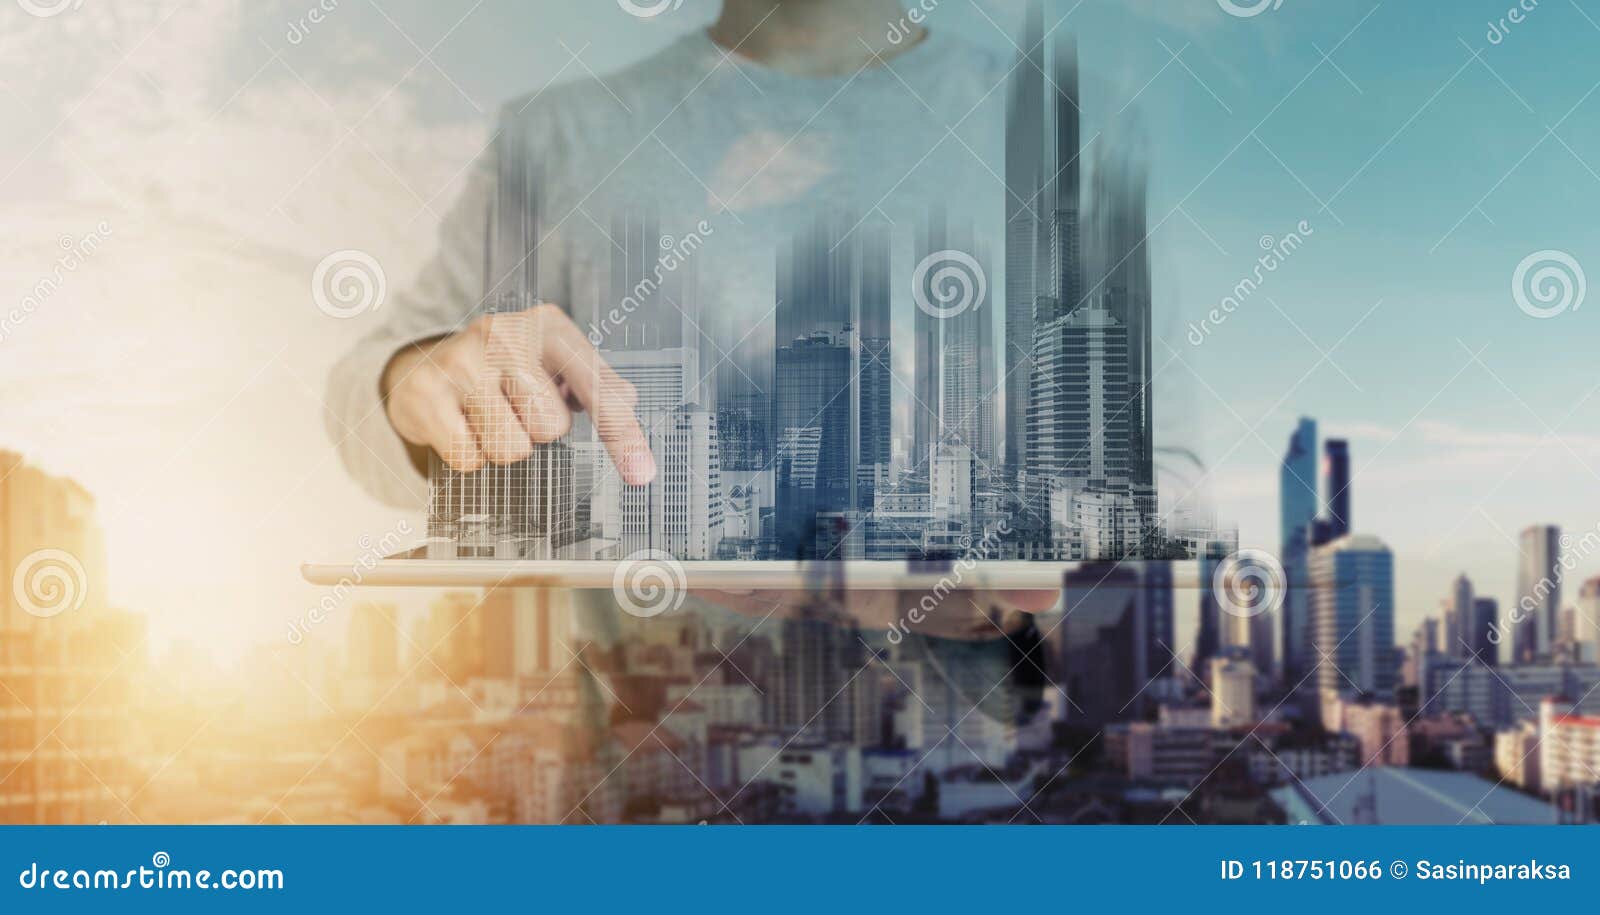 double exposure, a man using digital tablet, and modern buildings hologram. real estate business and building technology concept